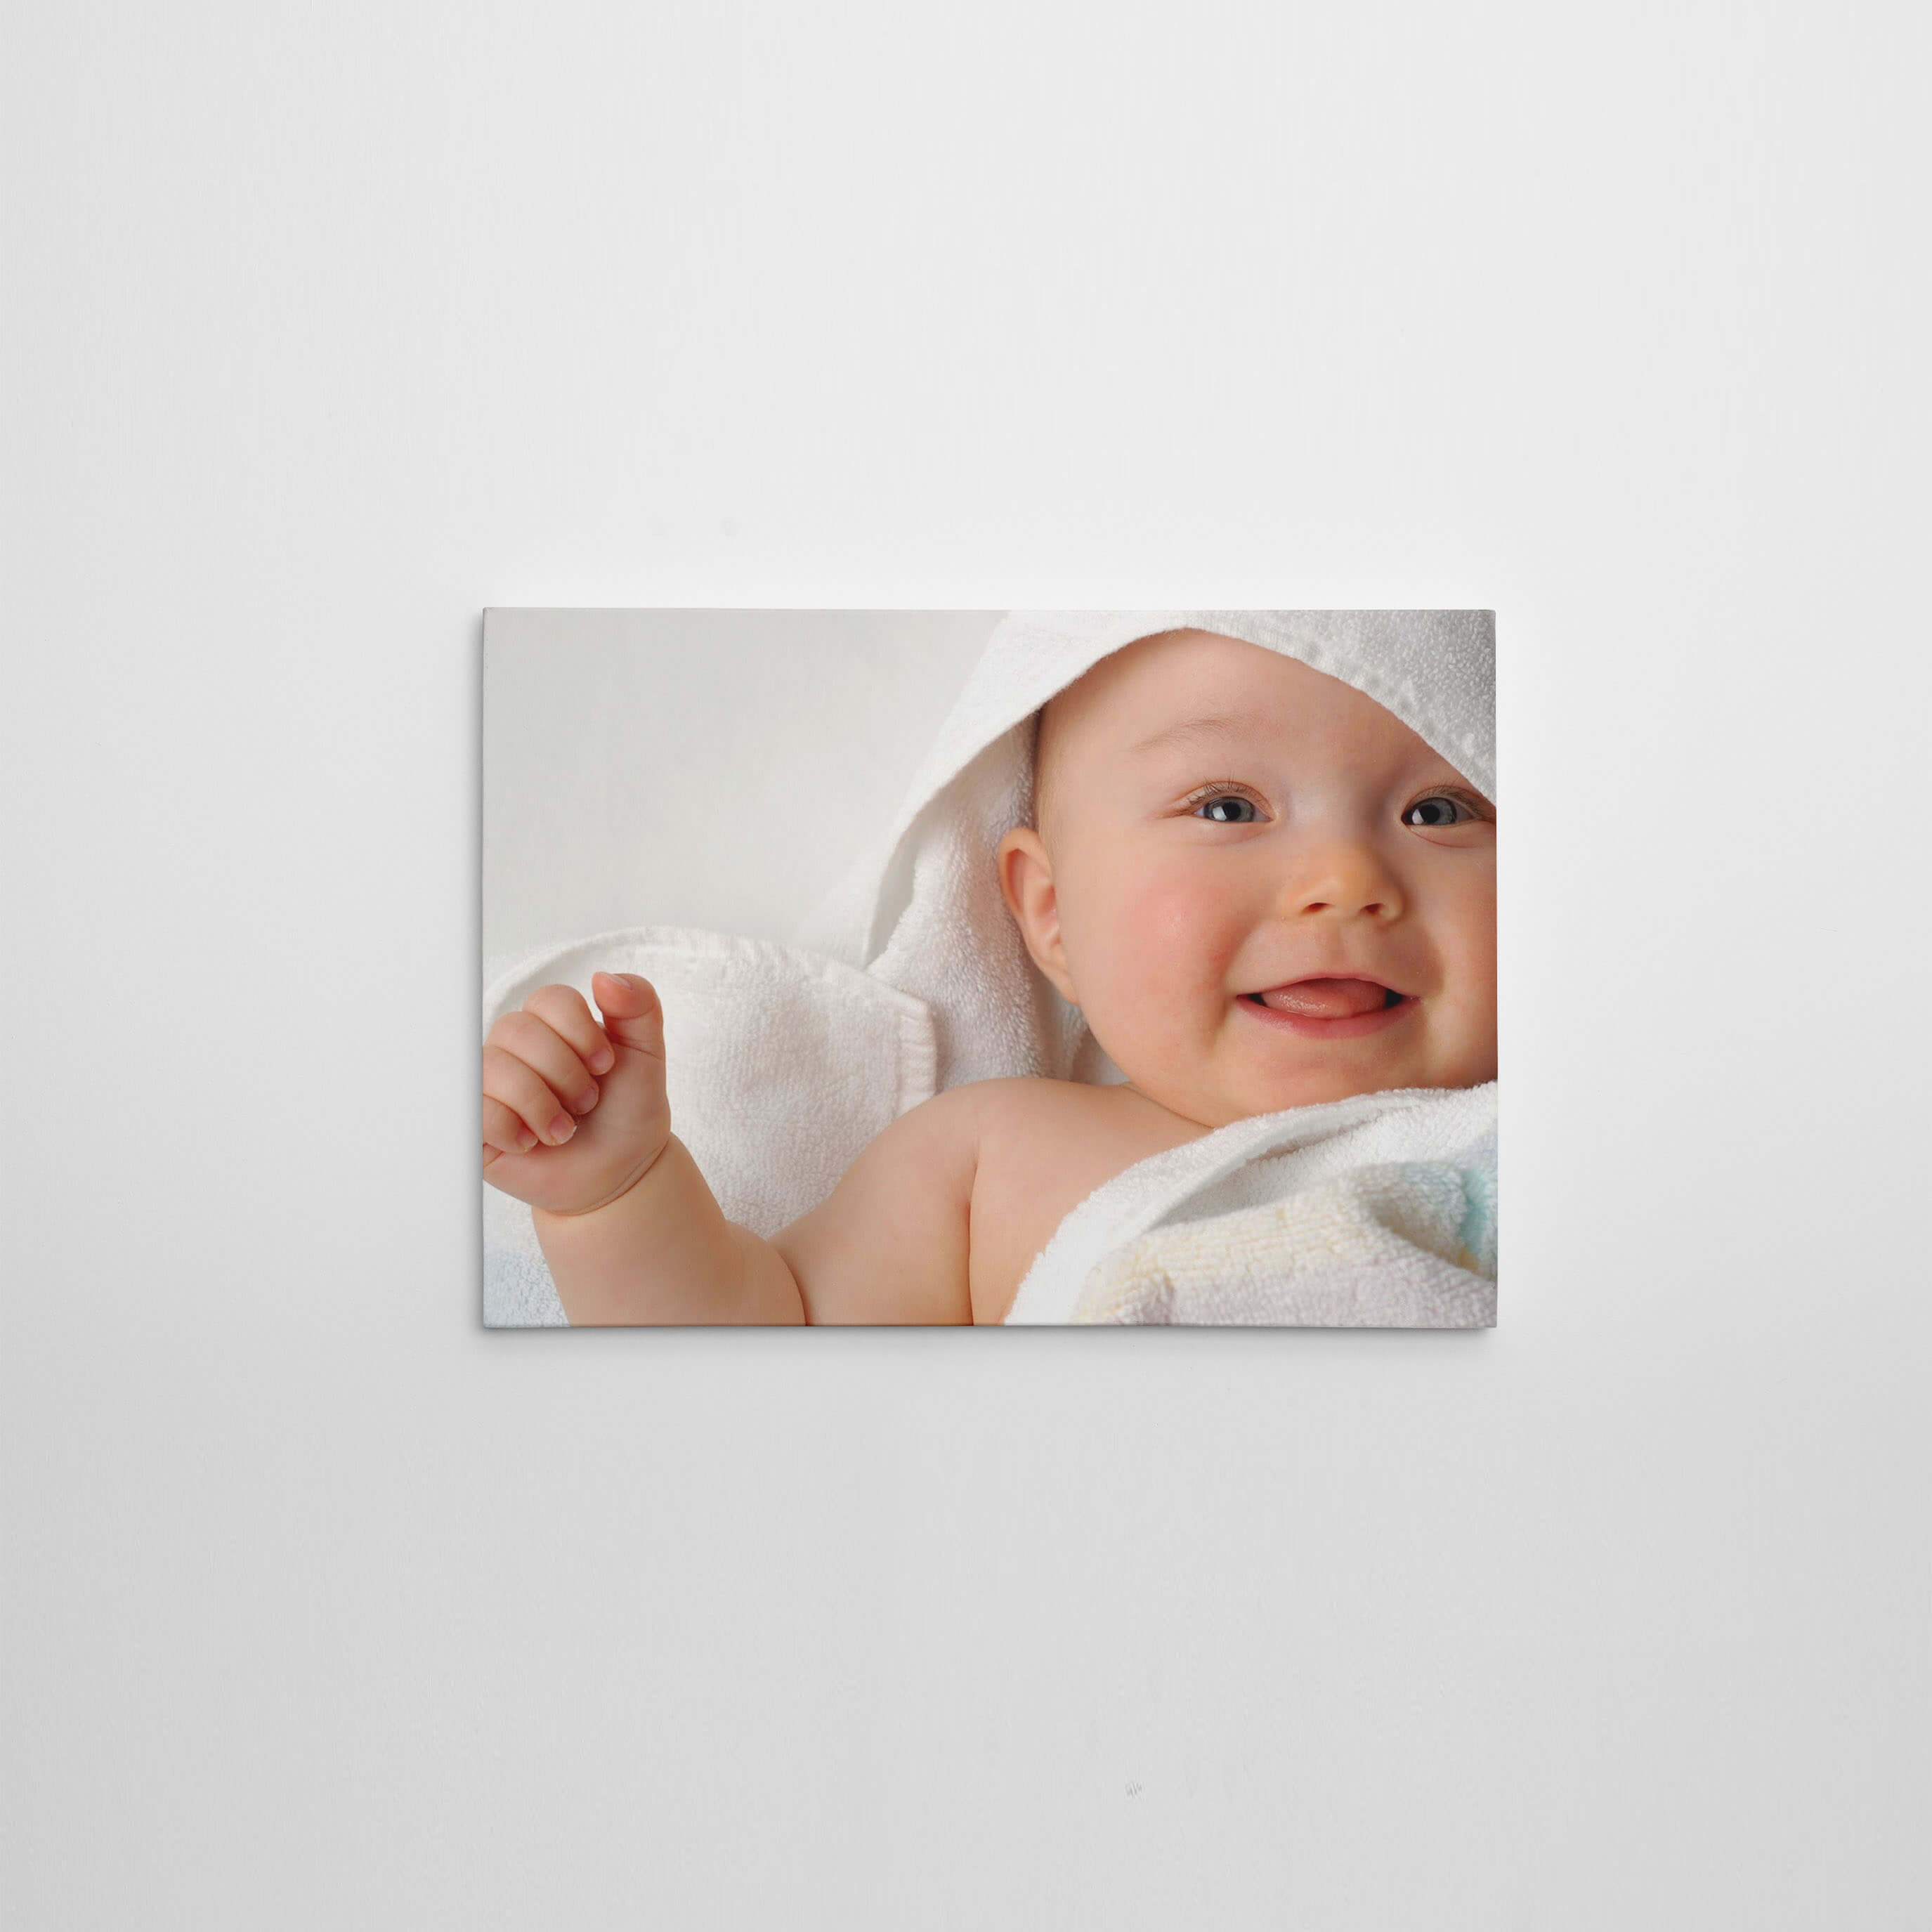 Kids and Baby Photos on Canvas1